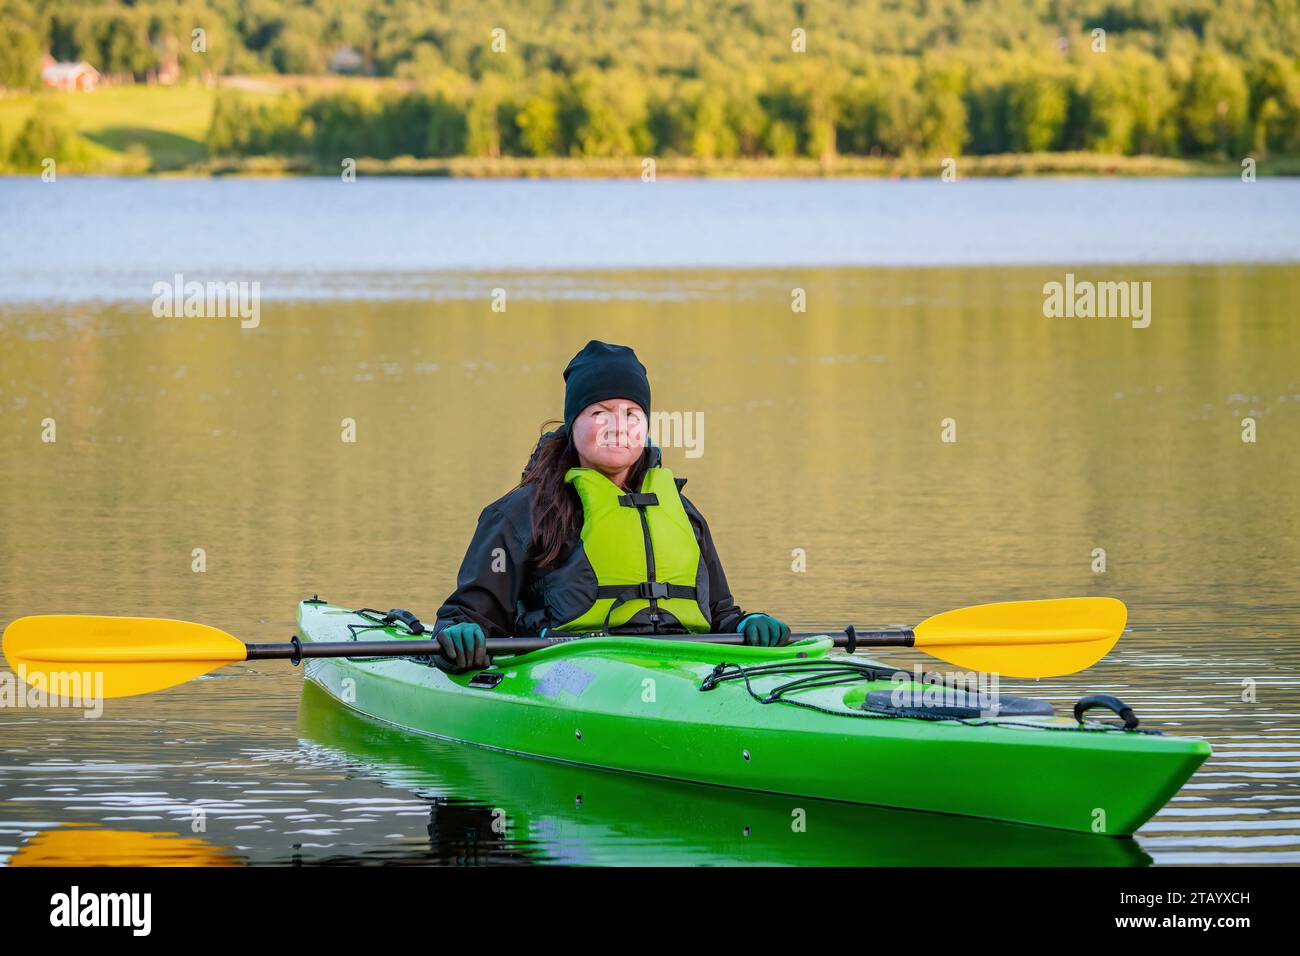 Mature women in green safety life jacket sits in green kayak and look at camera holding yellow paddle across boat. Very close up photo on still water Stock Photo